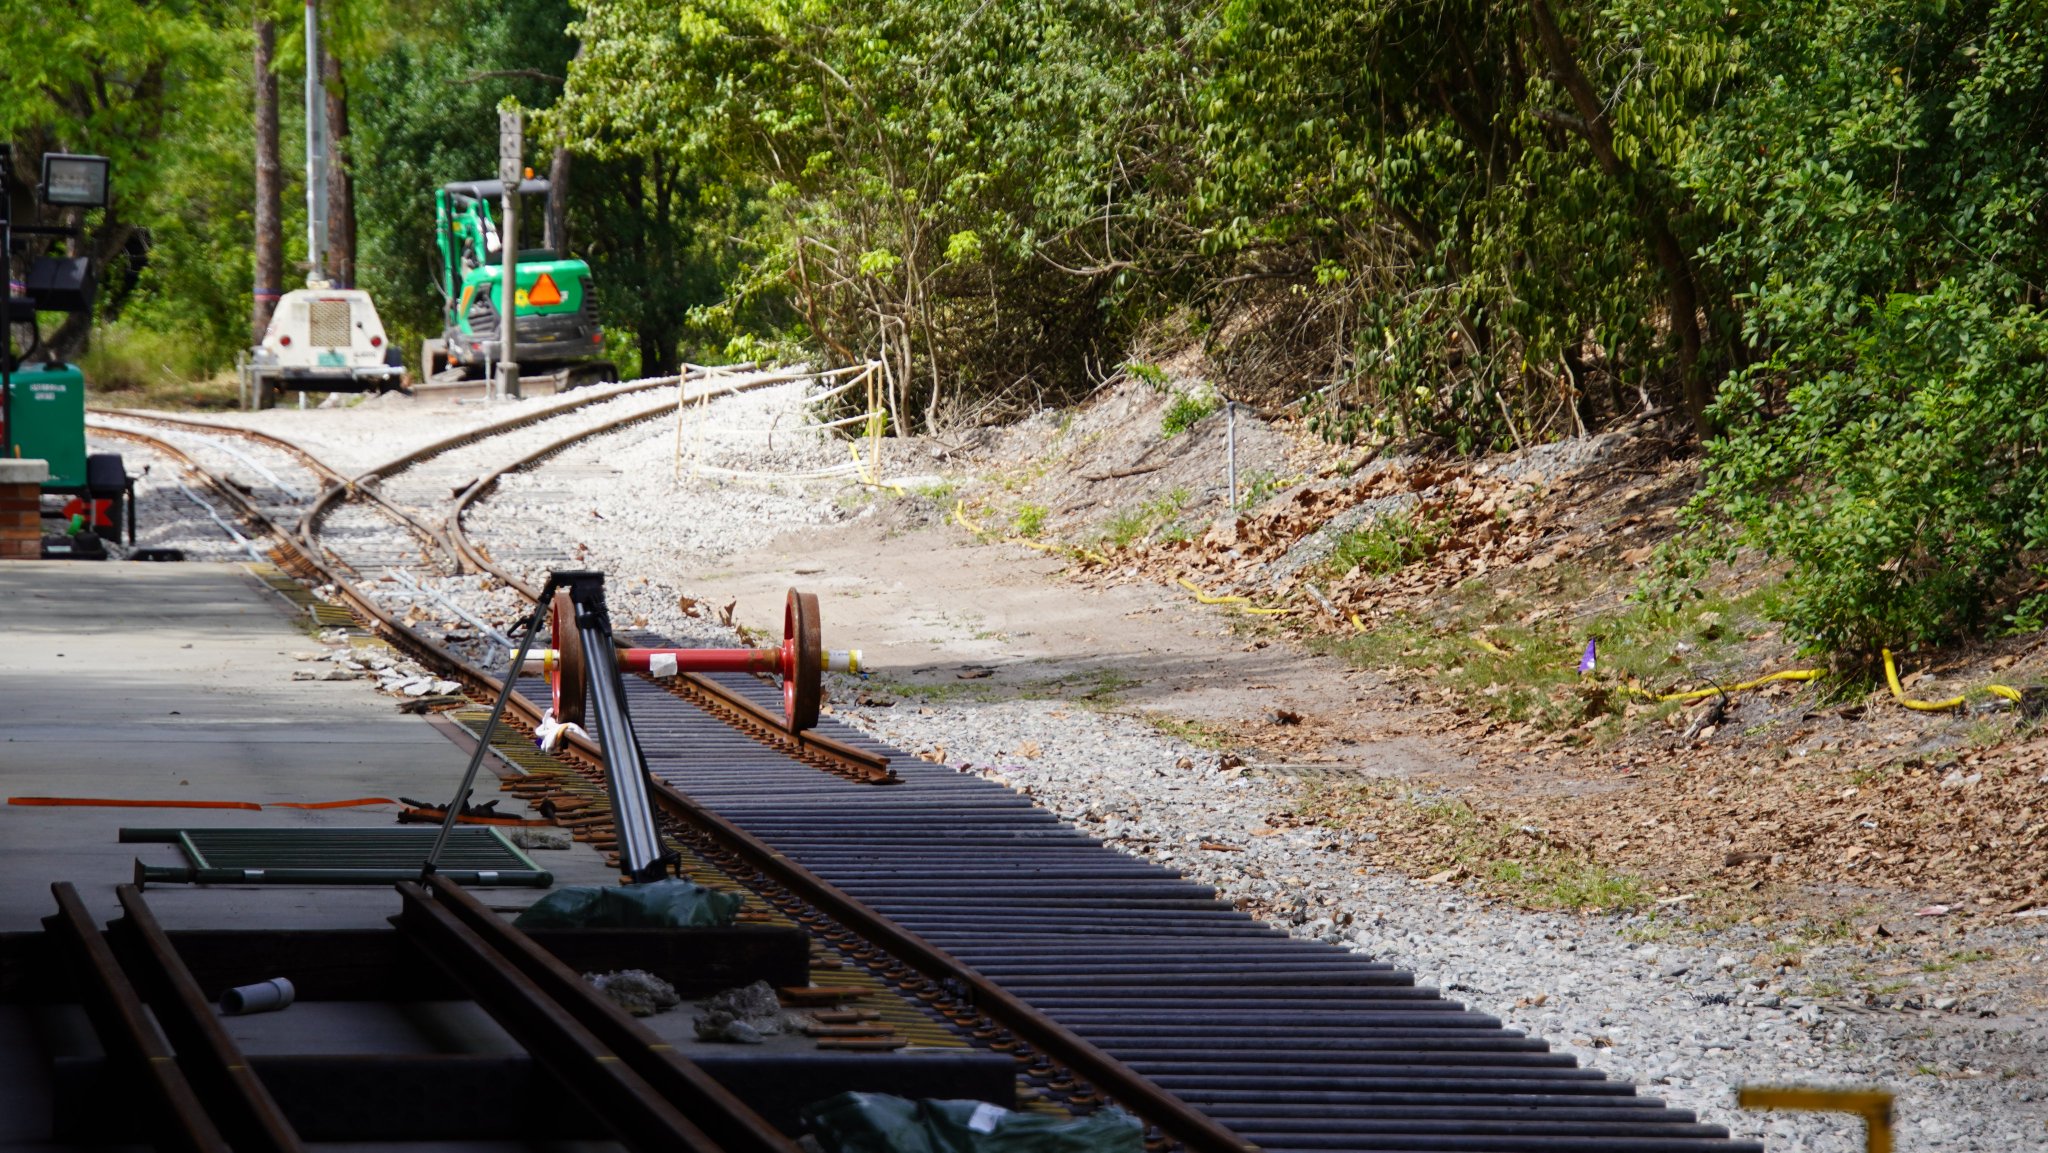 New Tracks are being layed out for Walt Disney World Railroad